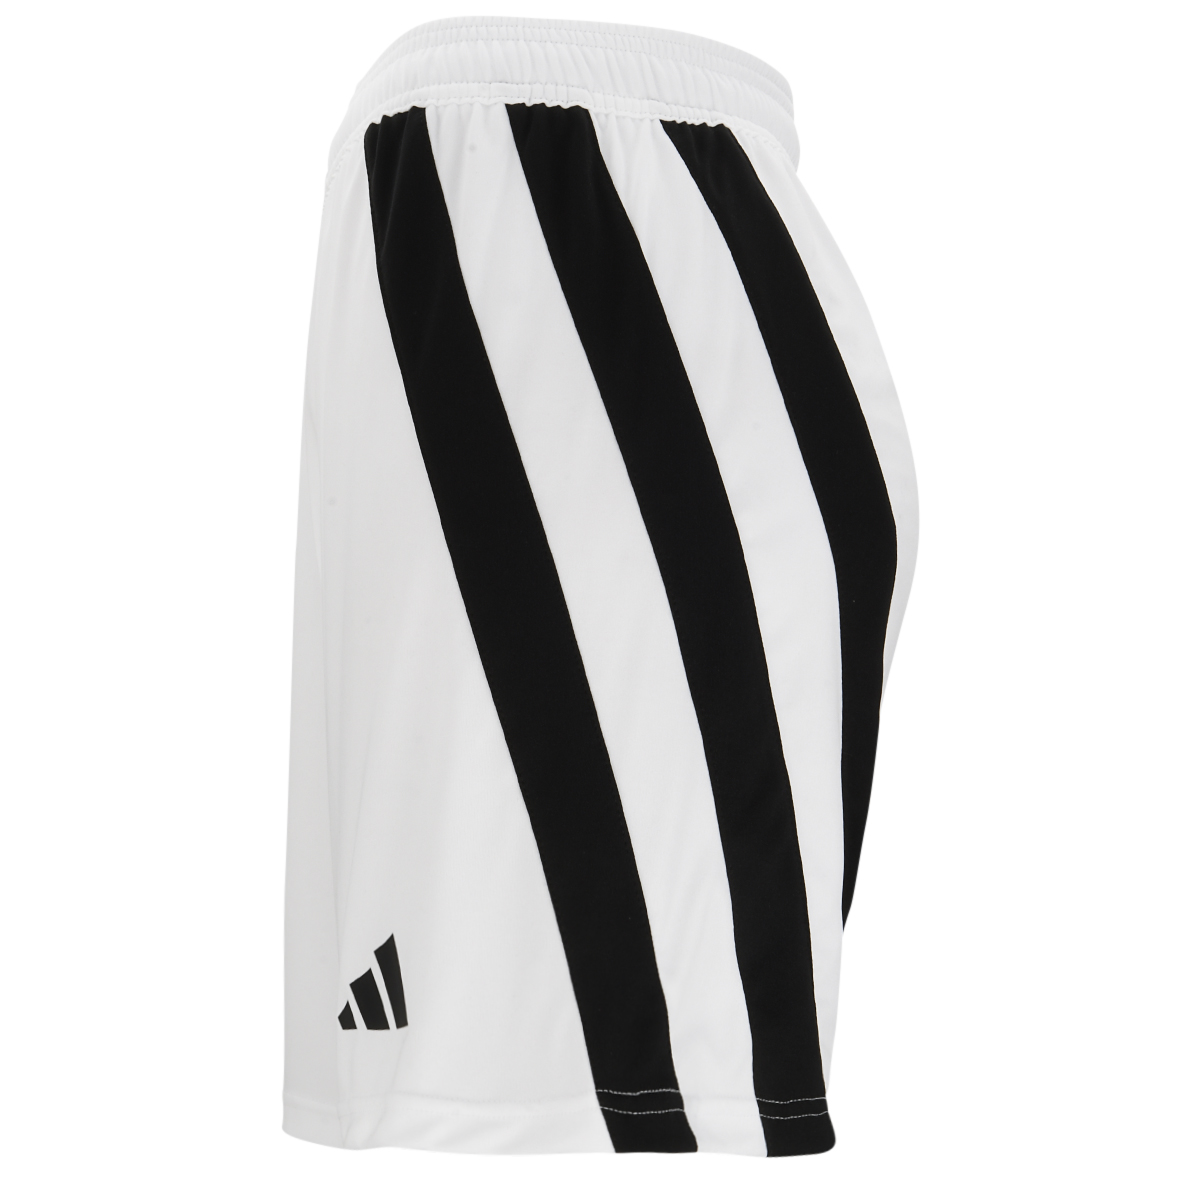 Short Fútbol adidas Fortore 23 Hombre,  image number null